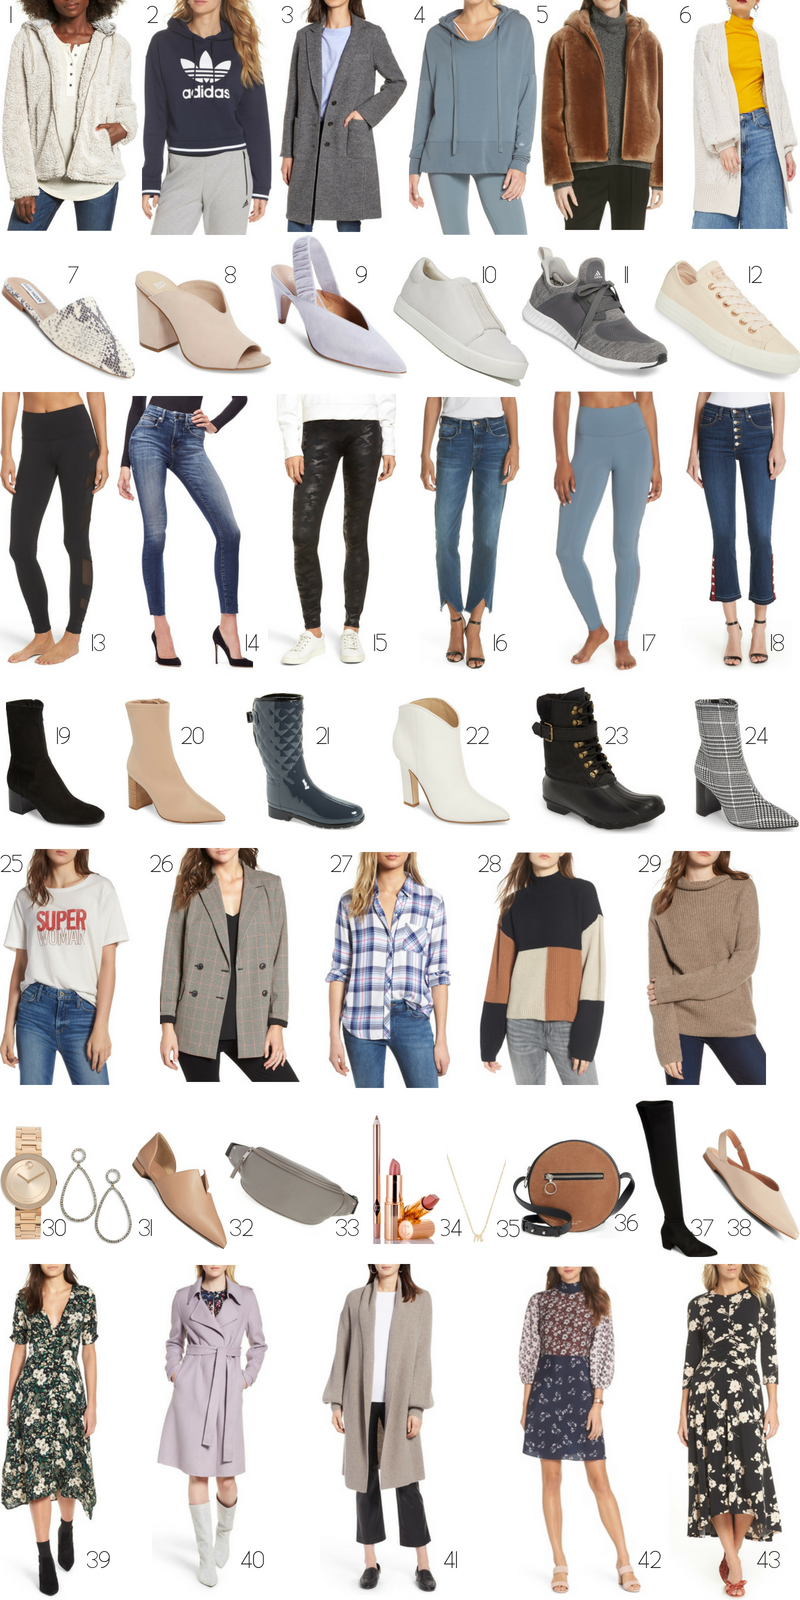 Nordstrom Anniversary Sale: Women's Fashion at Different Price Points featured by popular Las Vegas fashion blogger, Outfits & Outings